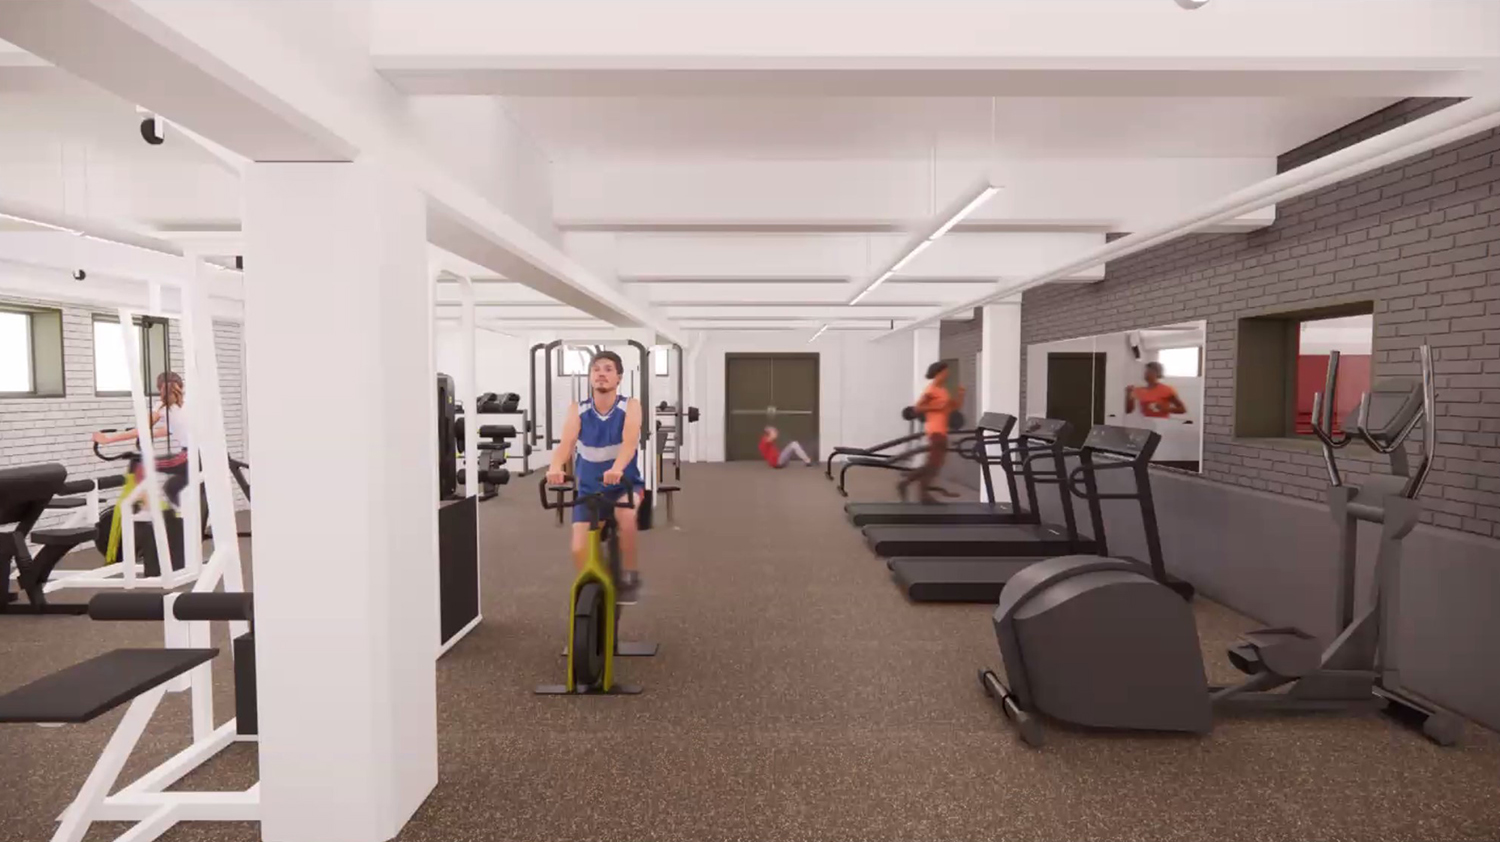 Fitness Room at Clarendon Community Center. Rendering by Booth Hansen